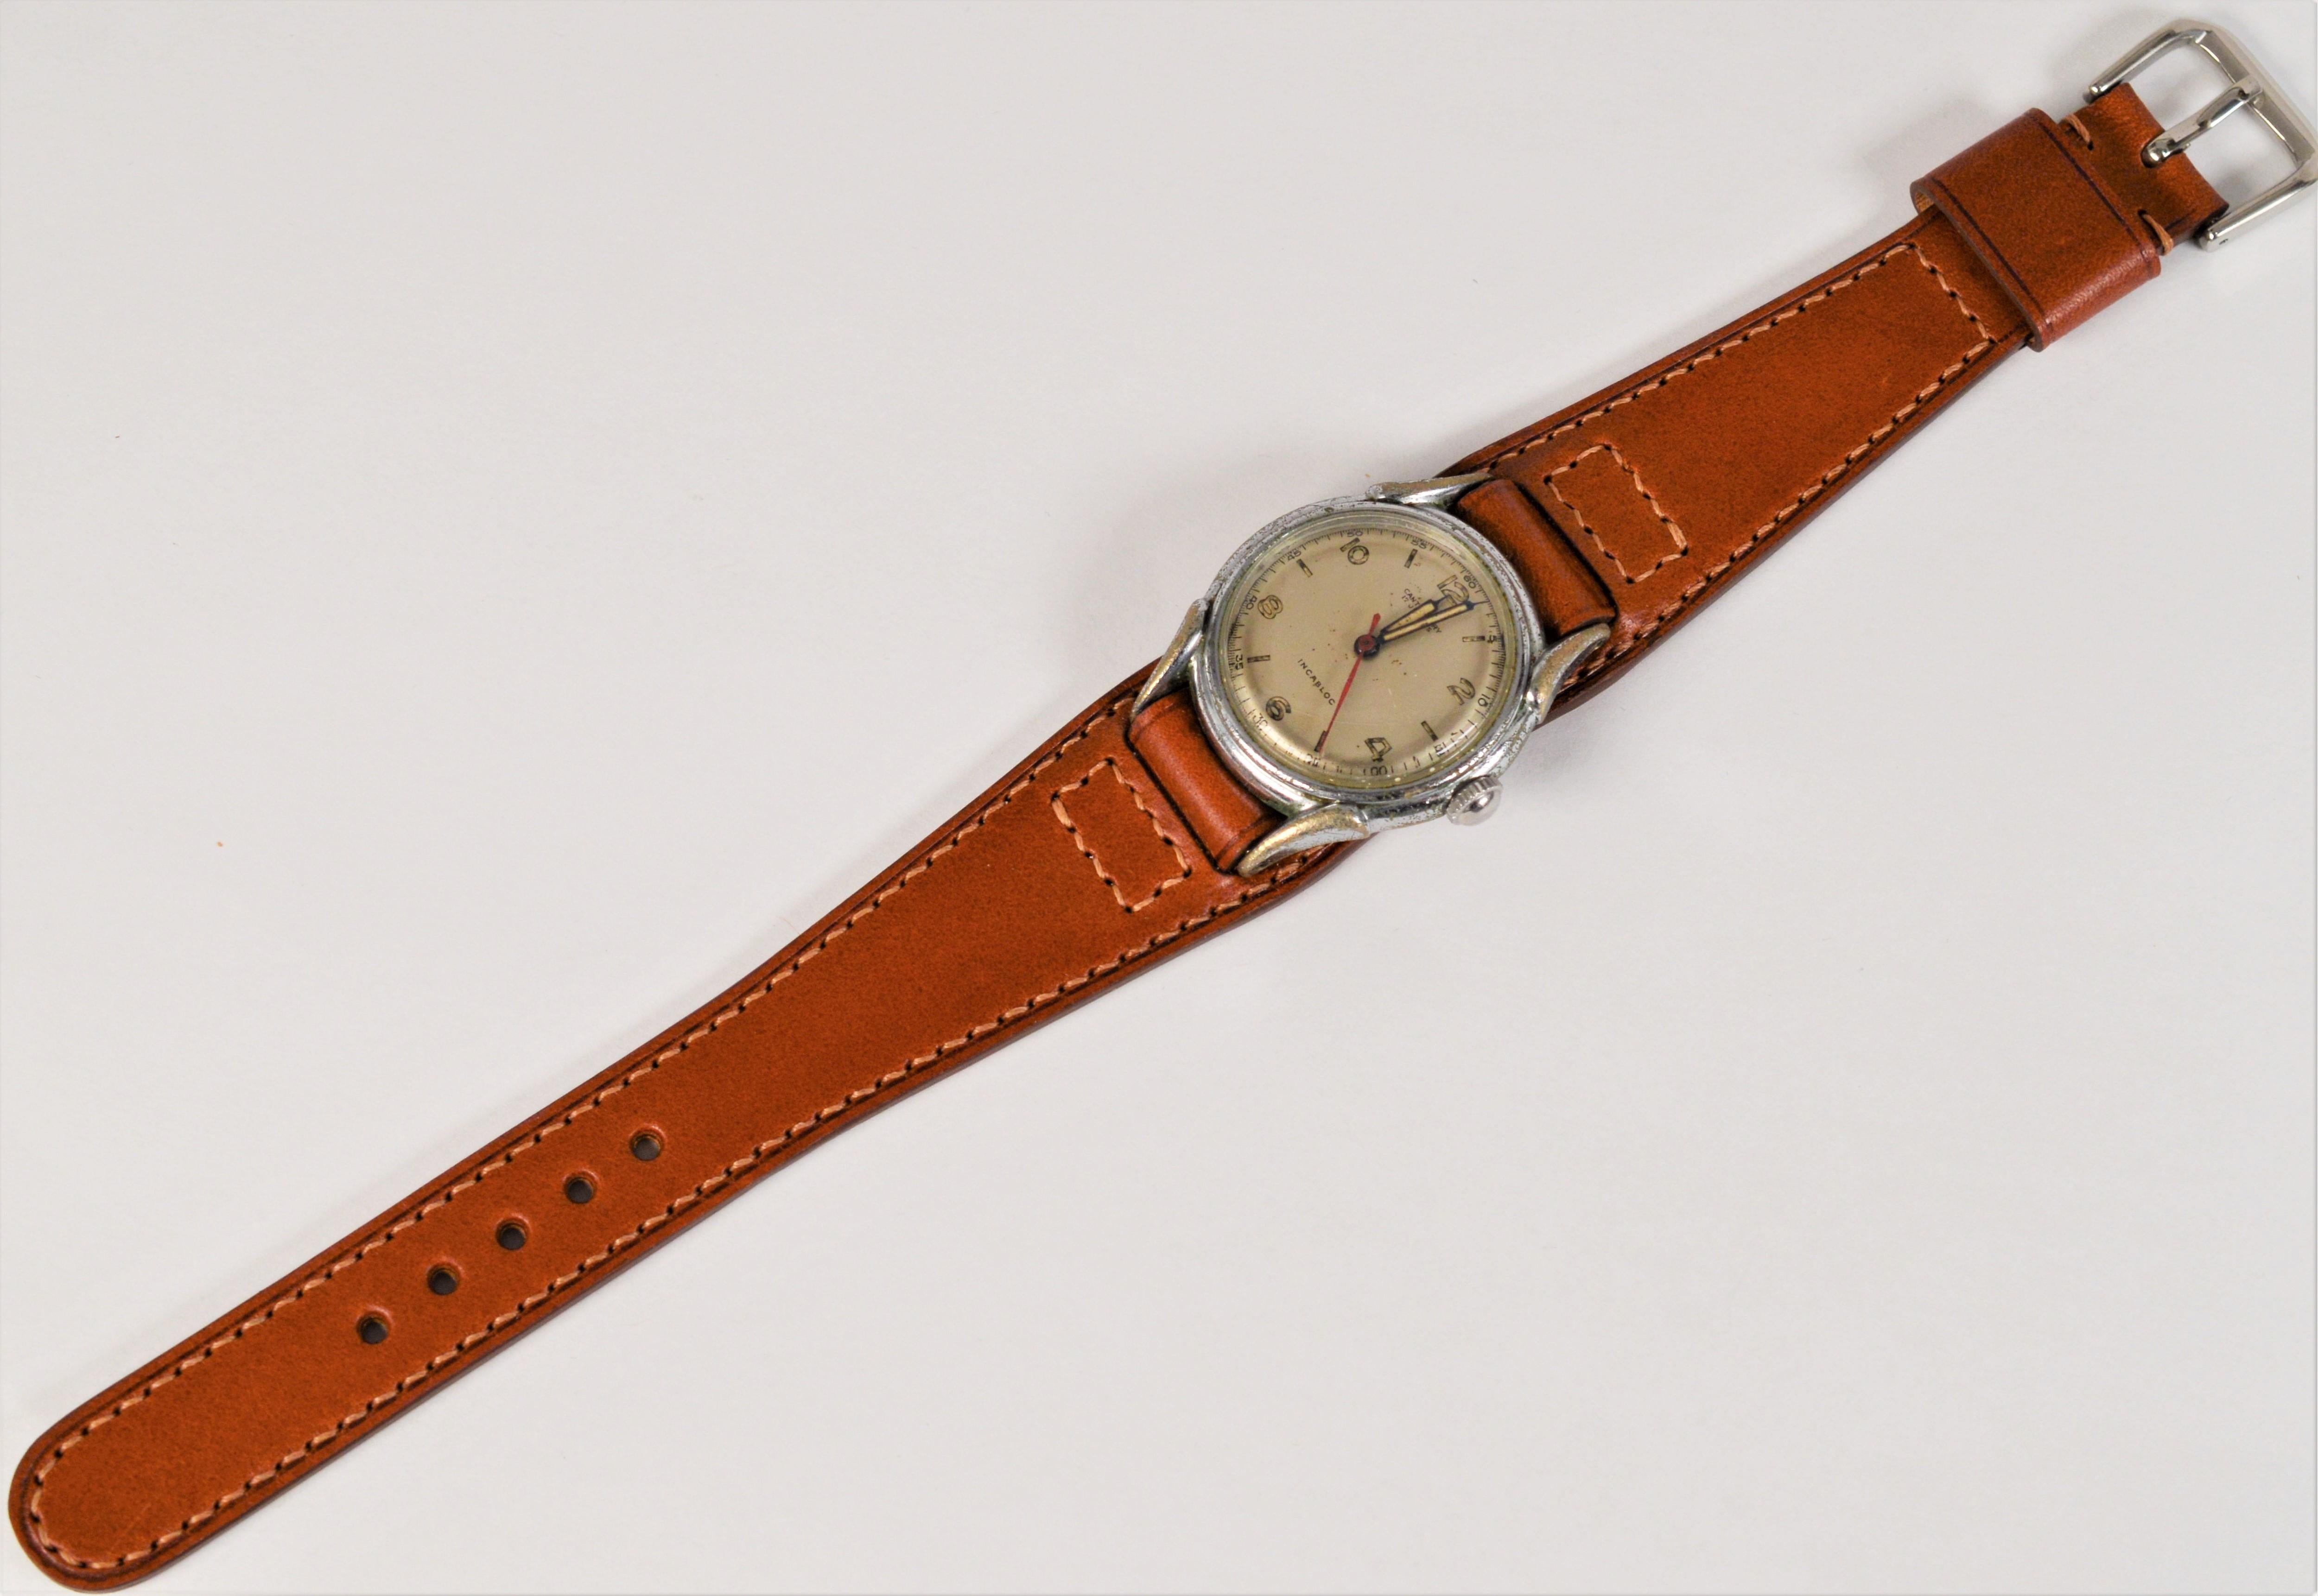 Canterbury Steel Incabloc Military Style Wrist Watch In Good Condition For Sale In Mount Kisco, NY